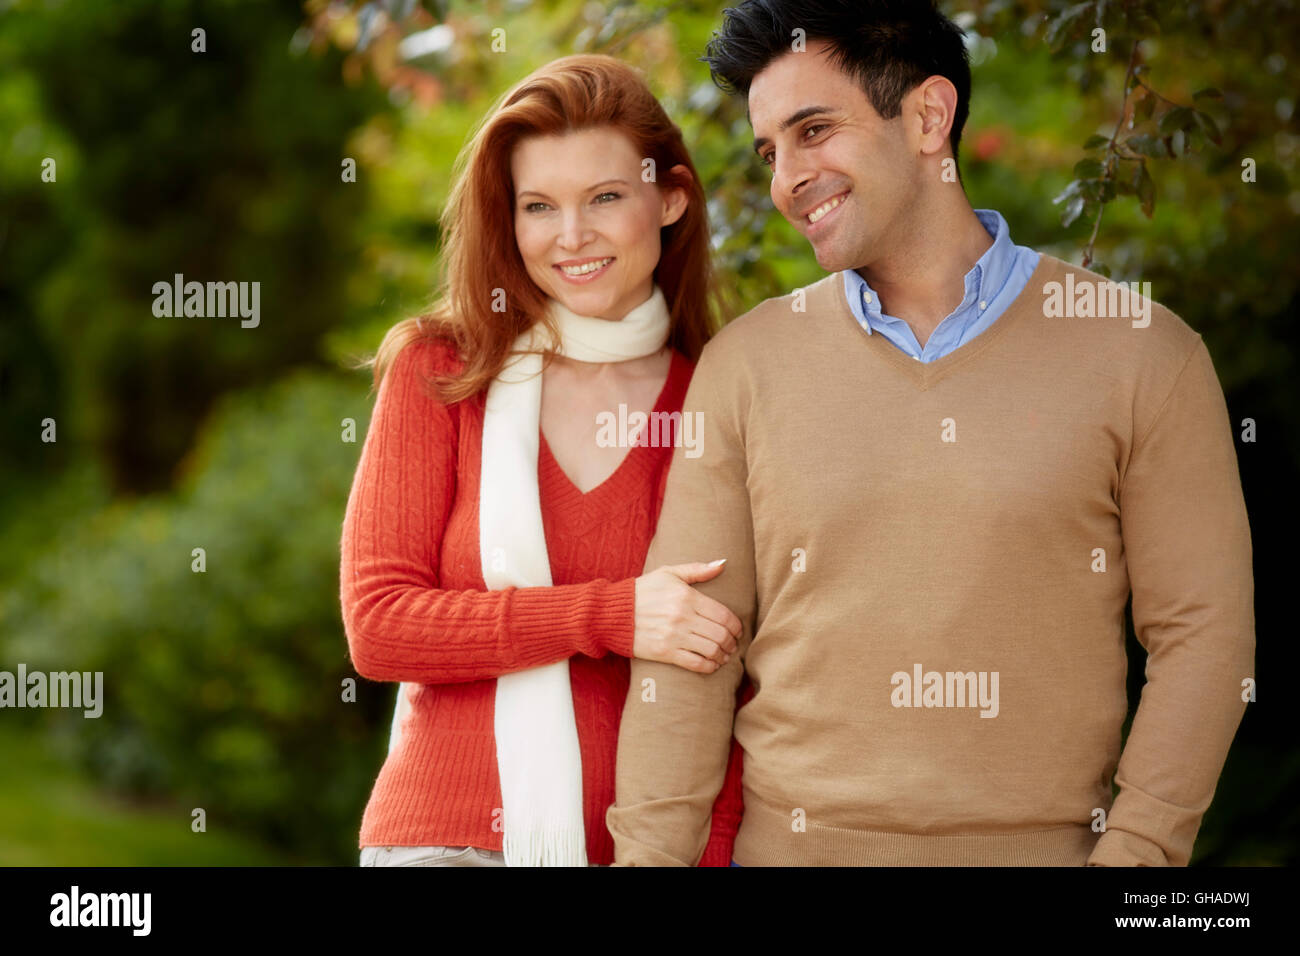 Happy couple walking together Stock Photo